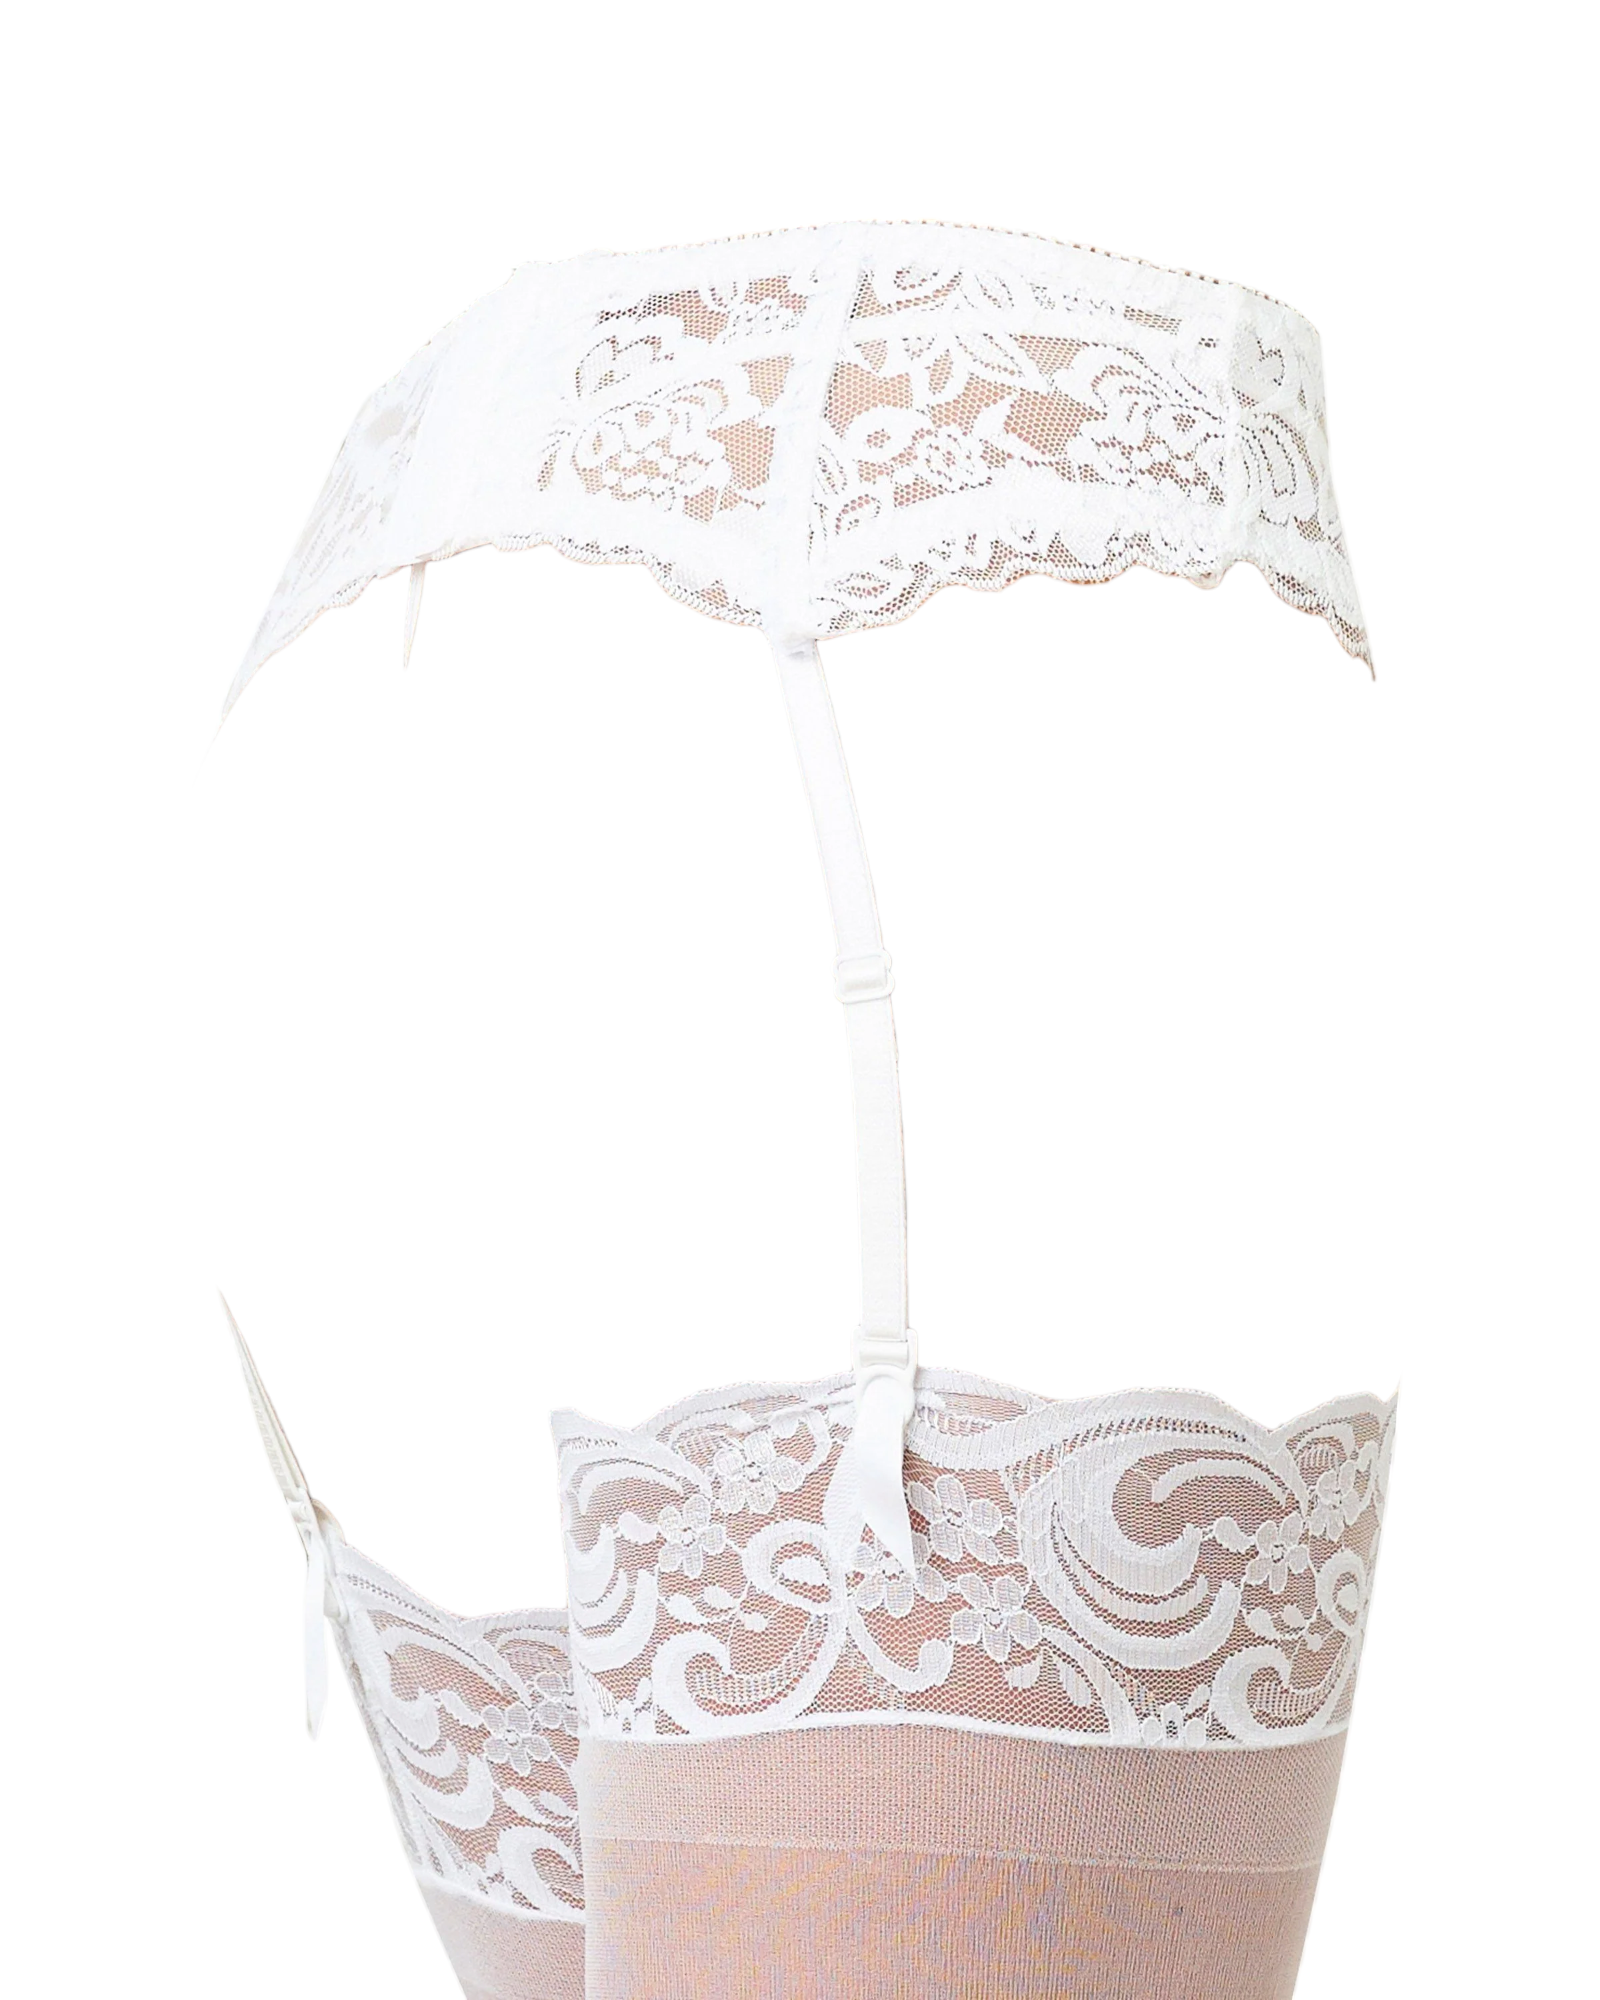 Dreamgirl Stretch Lace Garter belt with Scalloped Hem and Hook & Eye Back Closure White